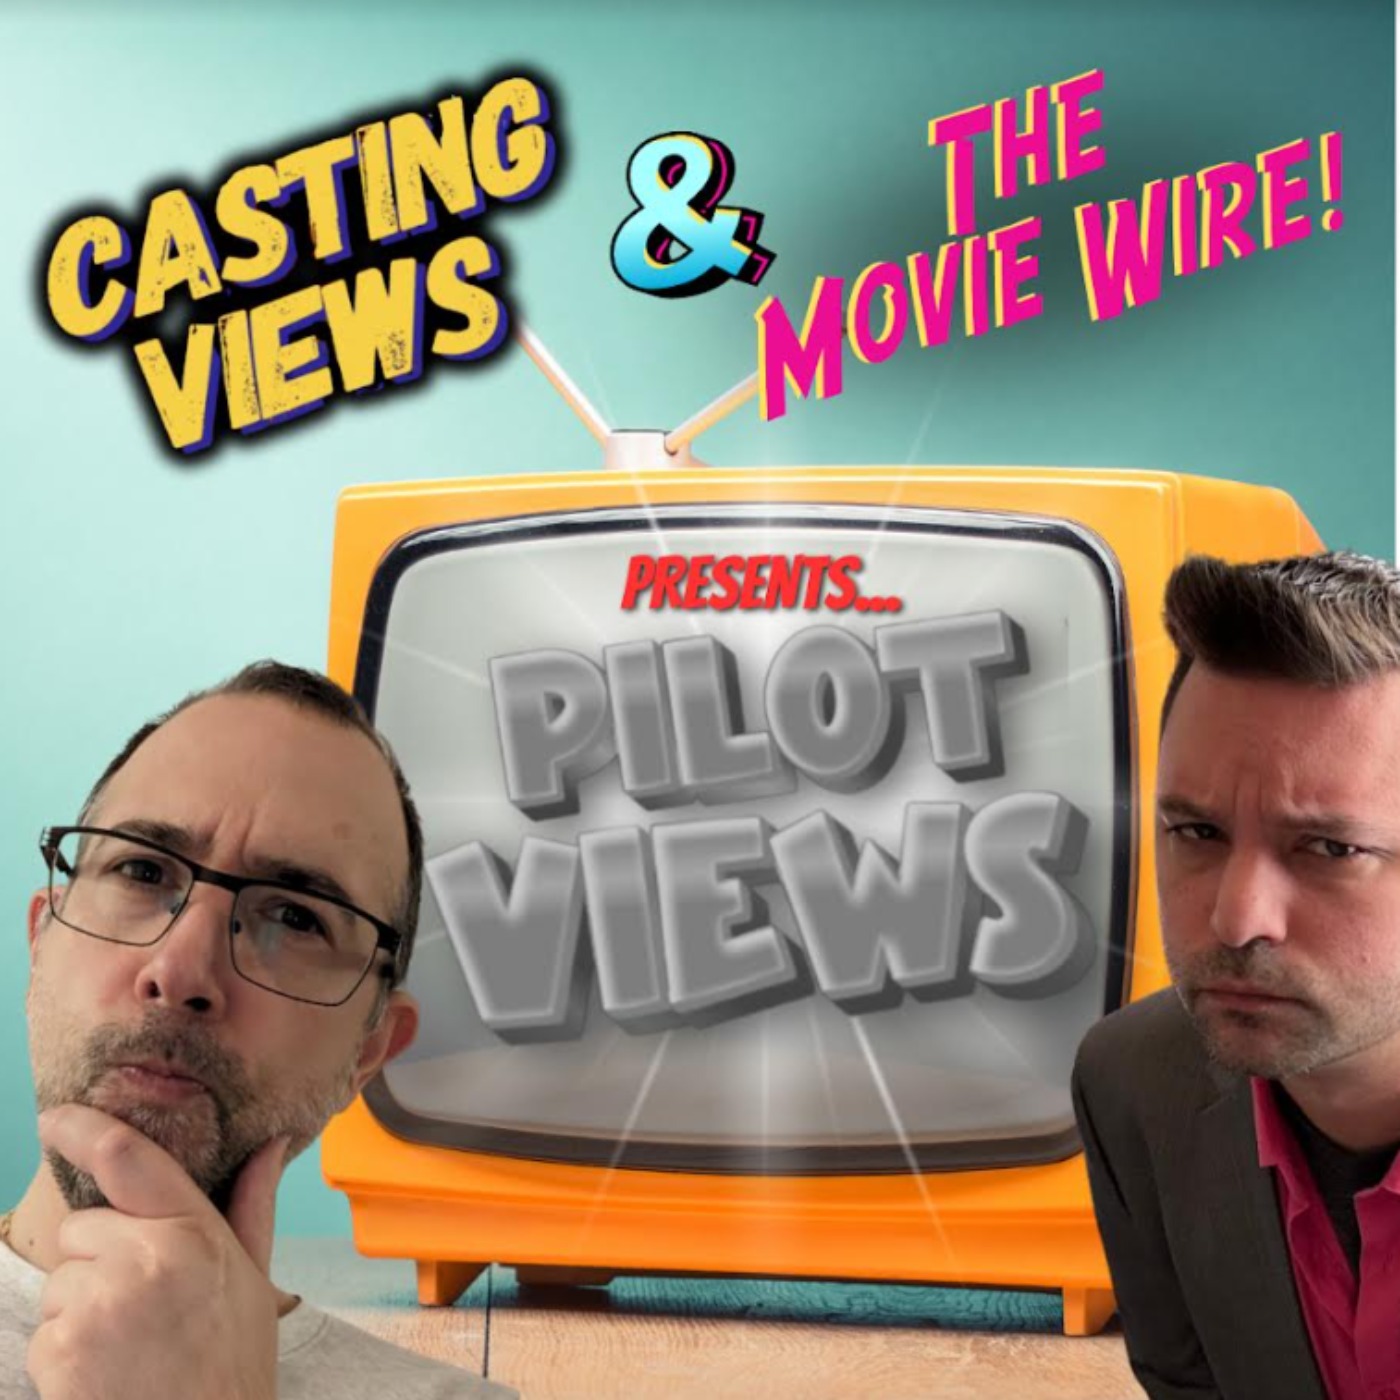 cover art for Pilot views - Cheers! Featuring Justin from The Movie Wire.